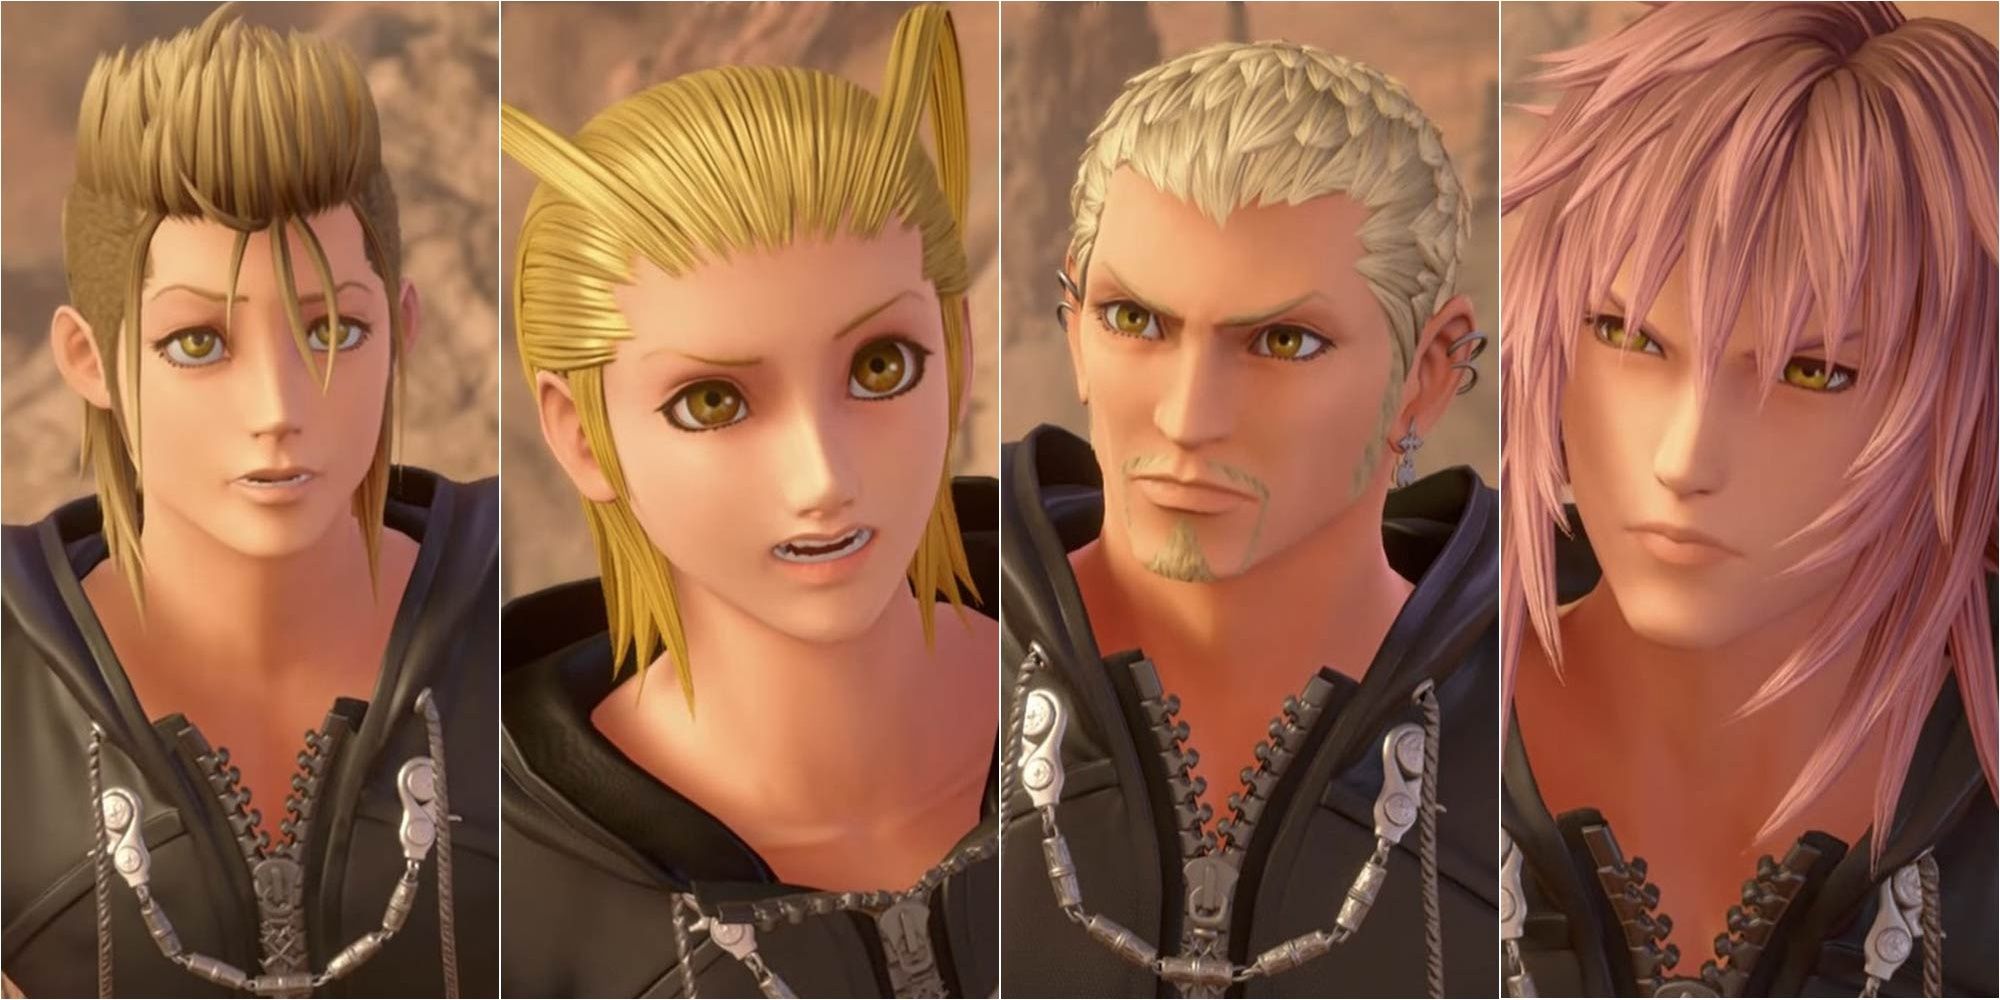 Demyx, Larxene, Luxord and Marluxia in Kingdom Hearts 3